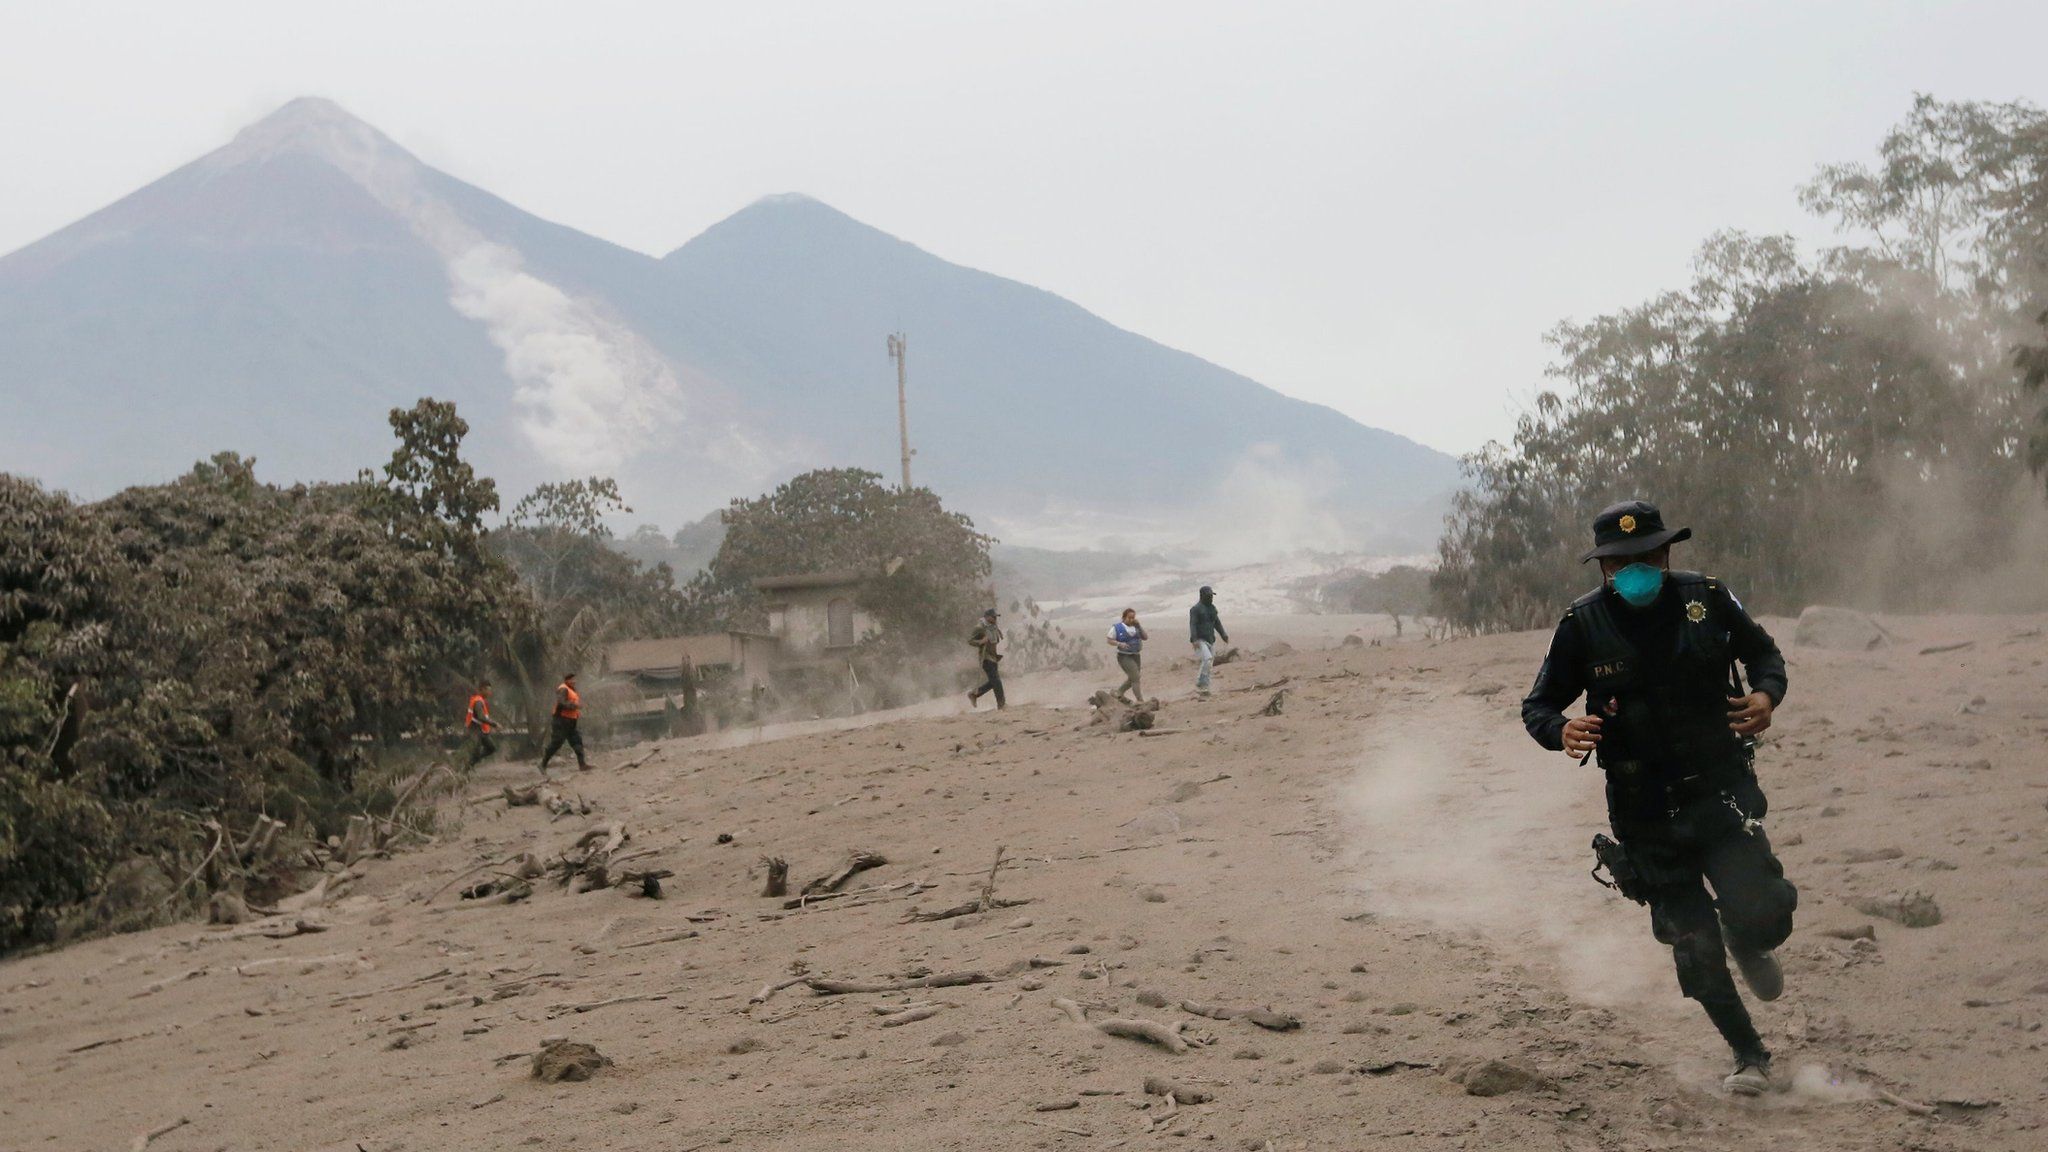 A police officer runs away from a new pyroclastic flow spewed by the Fuego volcano in the community of San Miguel Los Lotes in Escuintla, Guatemala, June 4, 2018